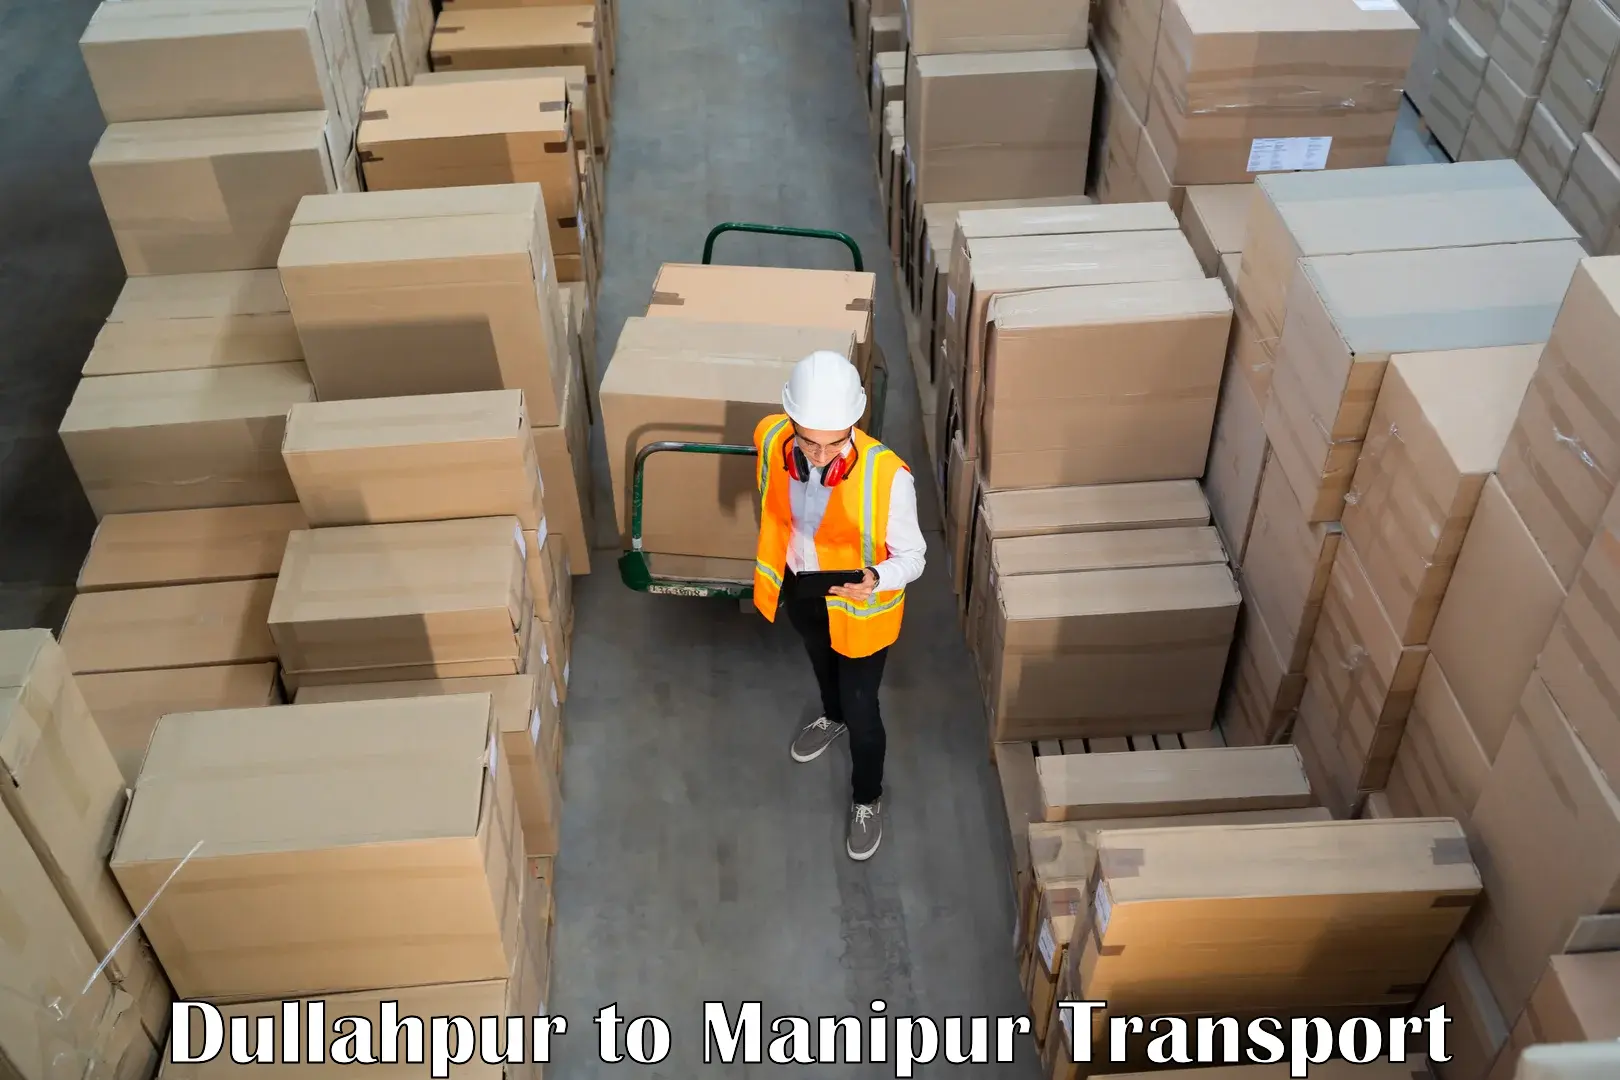 Daily parcel service transport in Dullahpur to Ukhrul